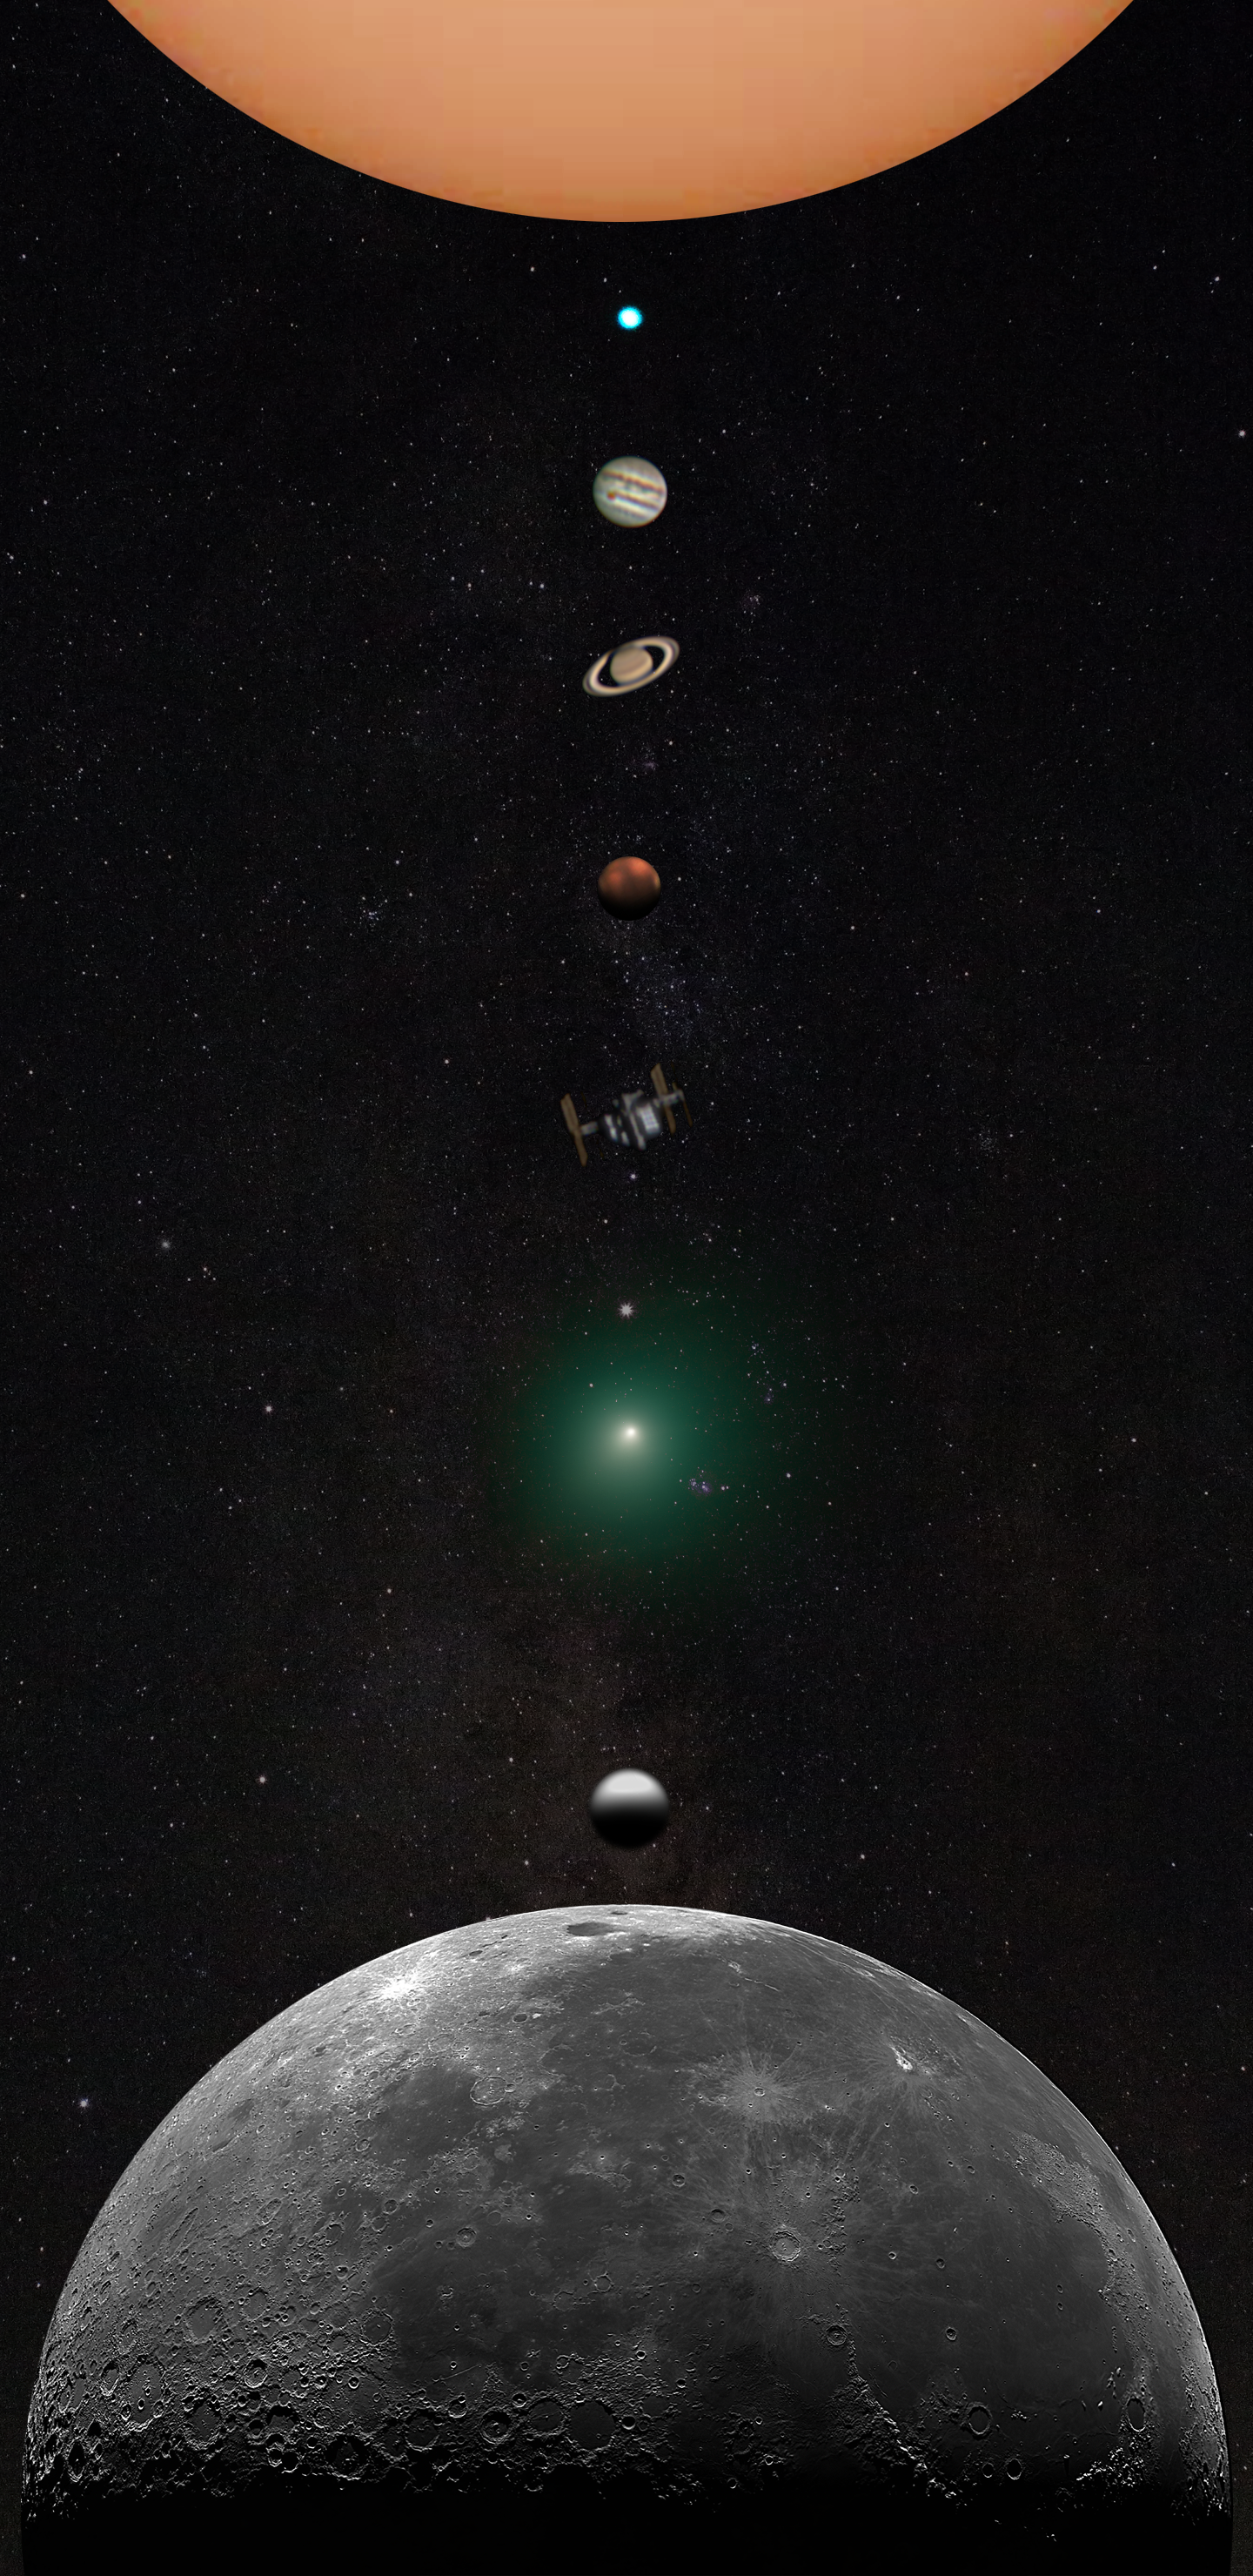 I made a phone wallpaper using every solar system object I